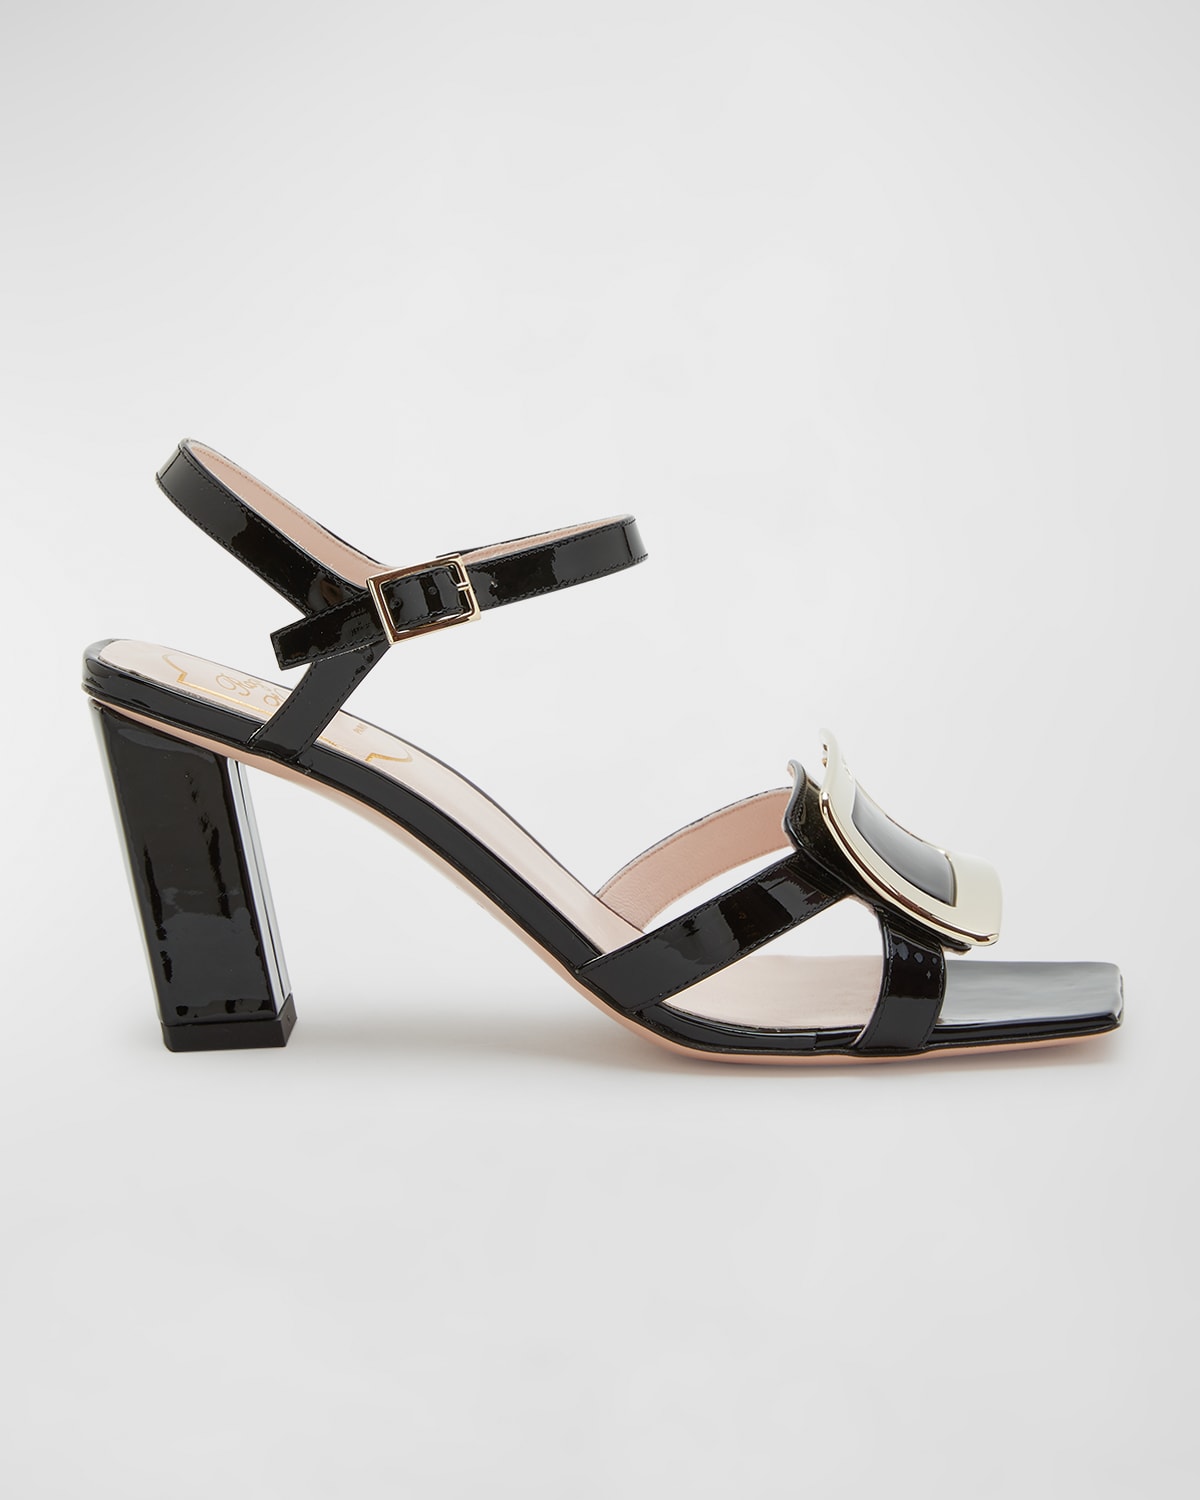 Metal Buckle Ankle-Strap Patent Leather Sandals